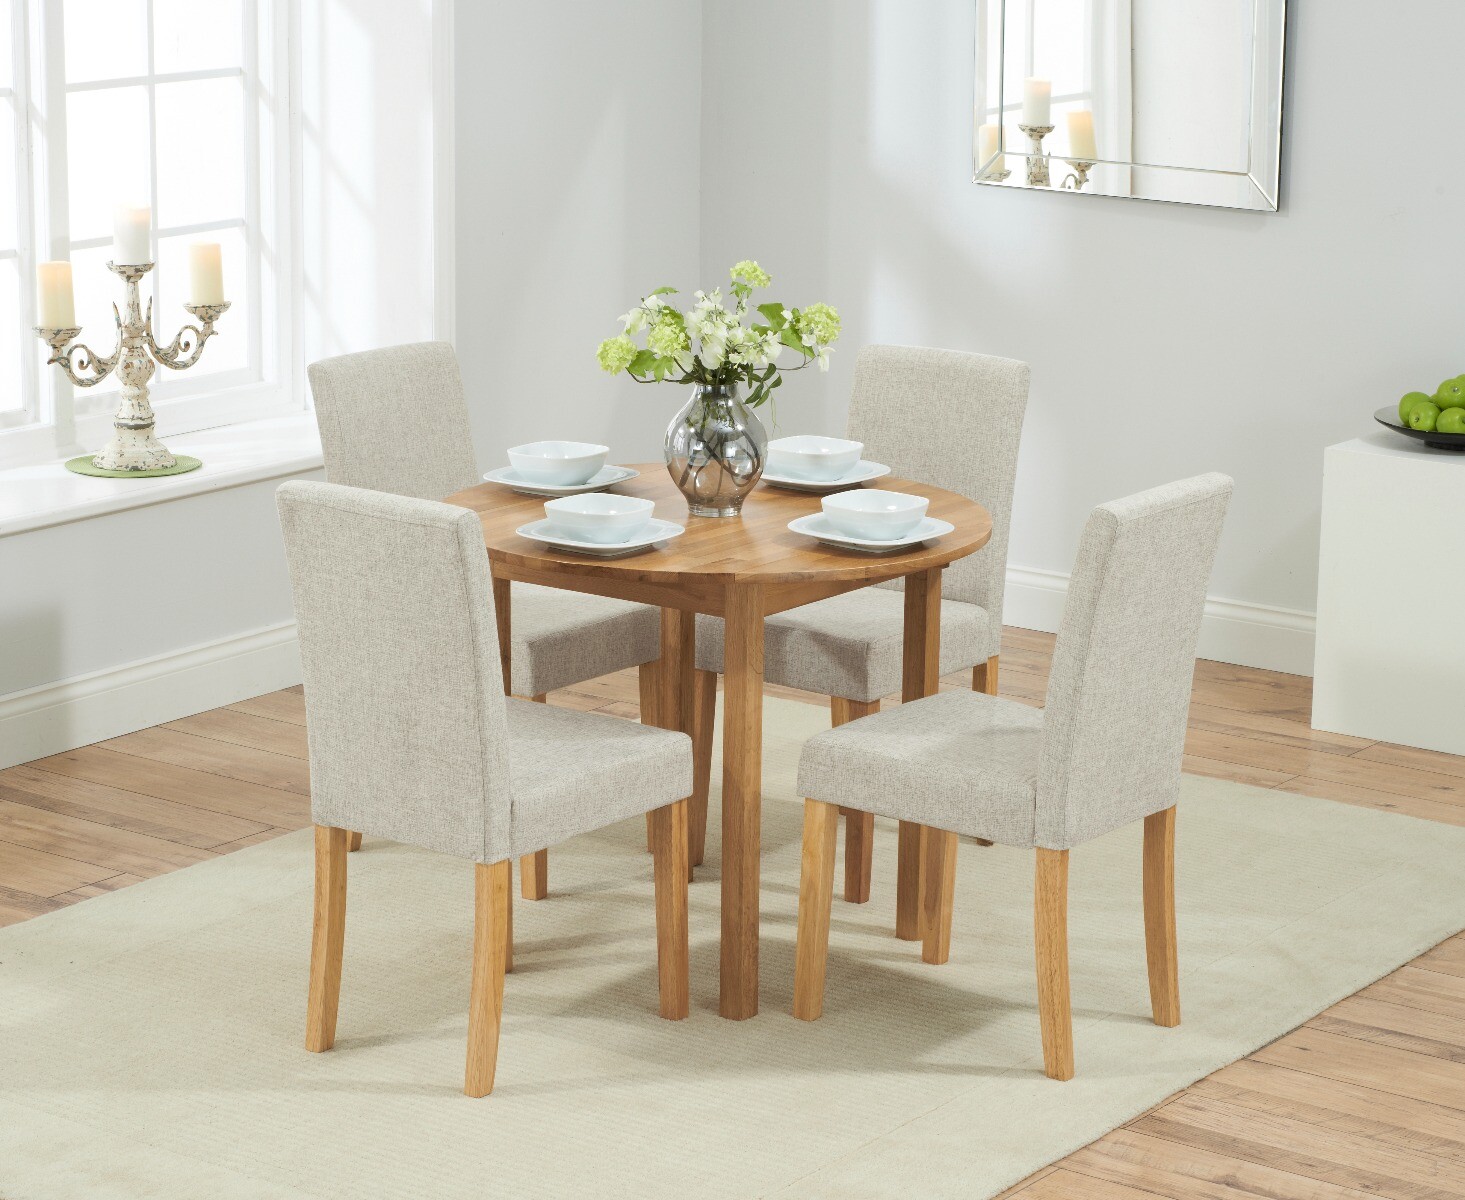 Extending York 90cm Solid Oak Dining Table With 2 Natural Lila Chairs